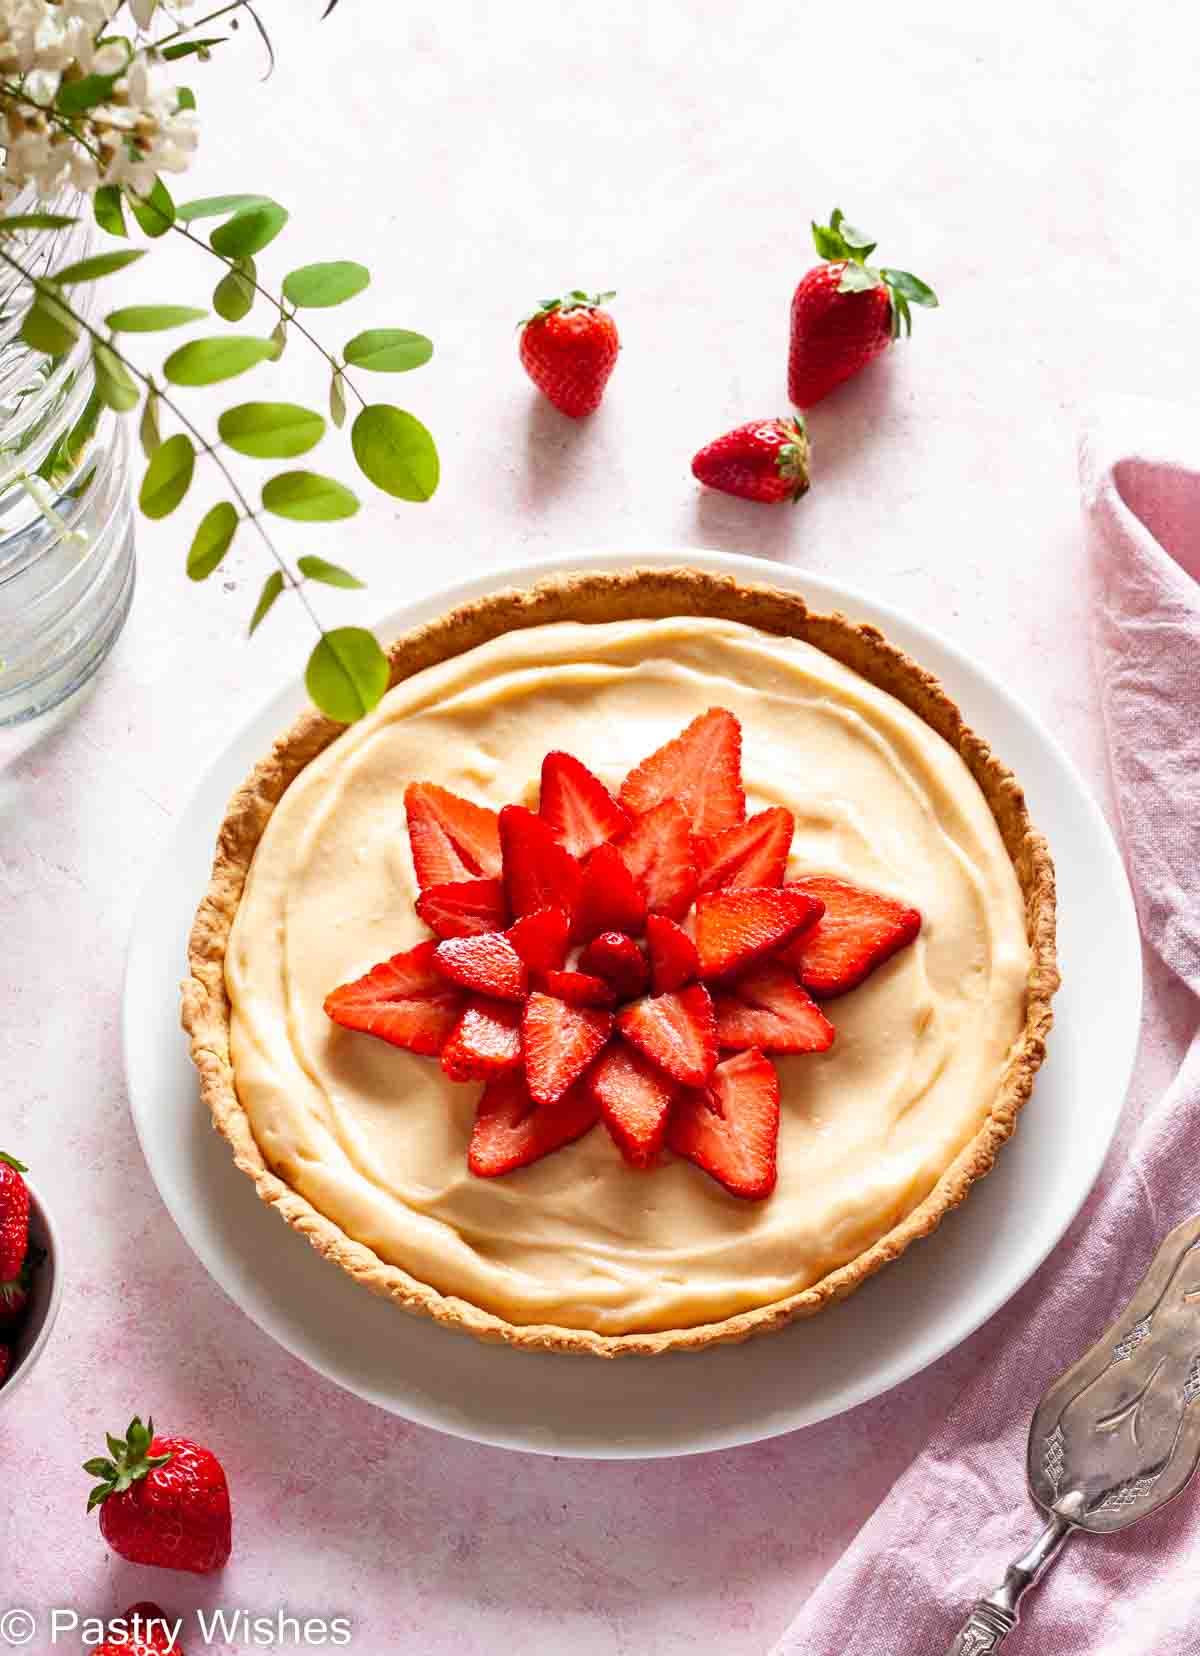 An overhead photo of a tarte aux fraises, French strawberry tart, on a pink surface next to strawberries and a vase filled with flowers.